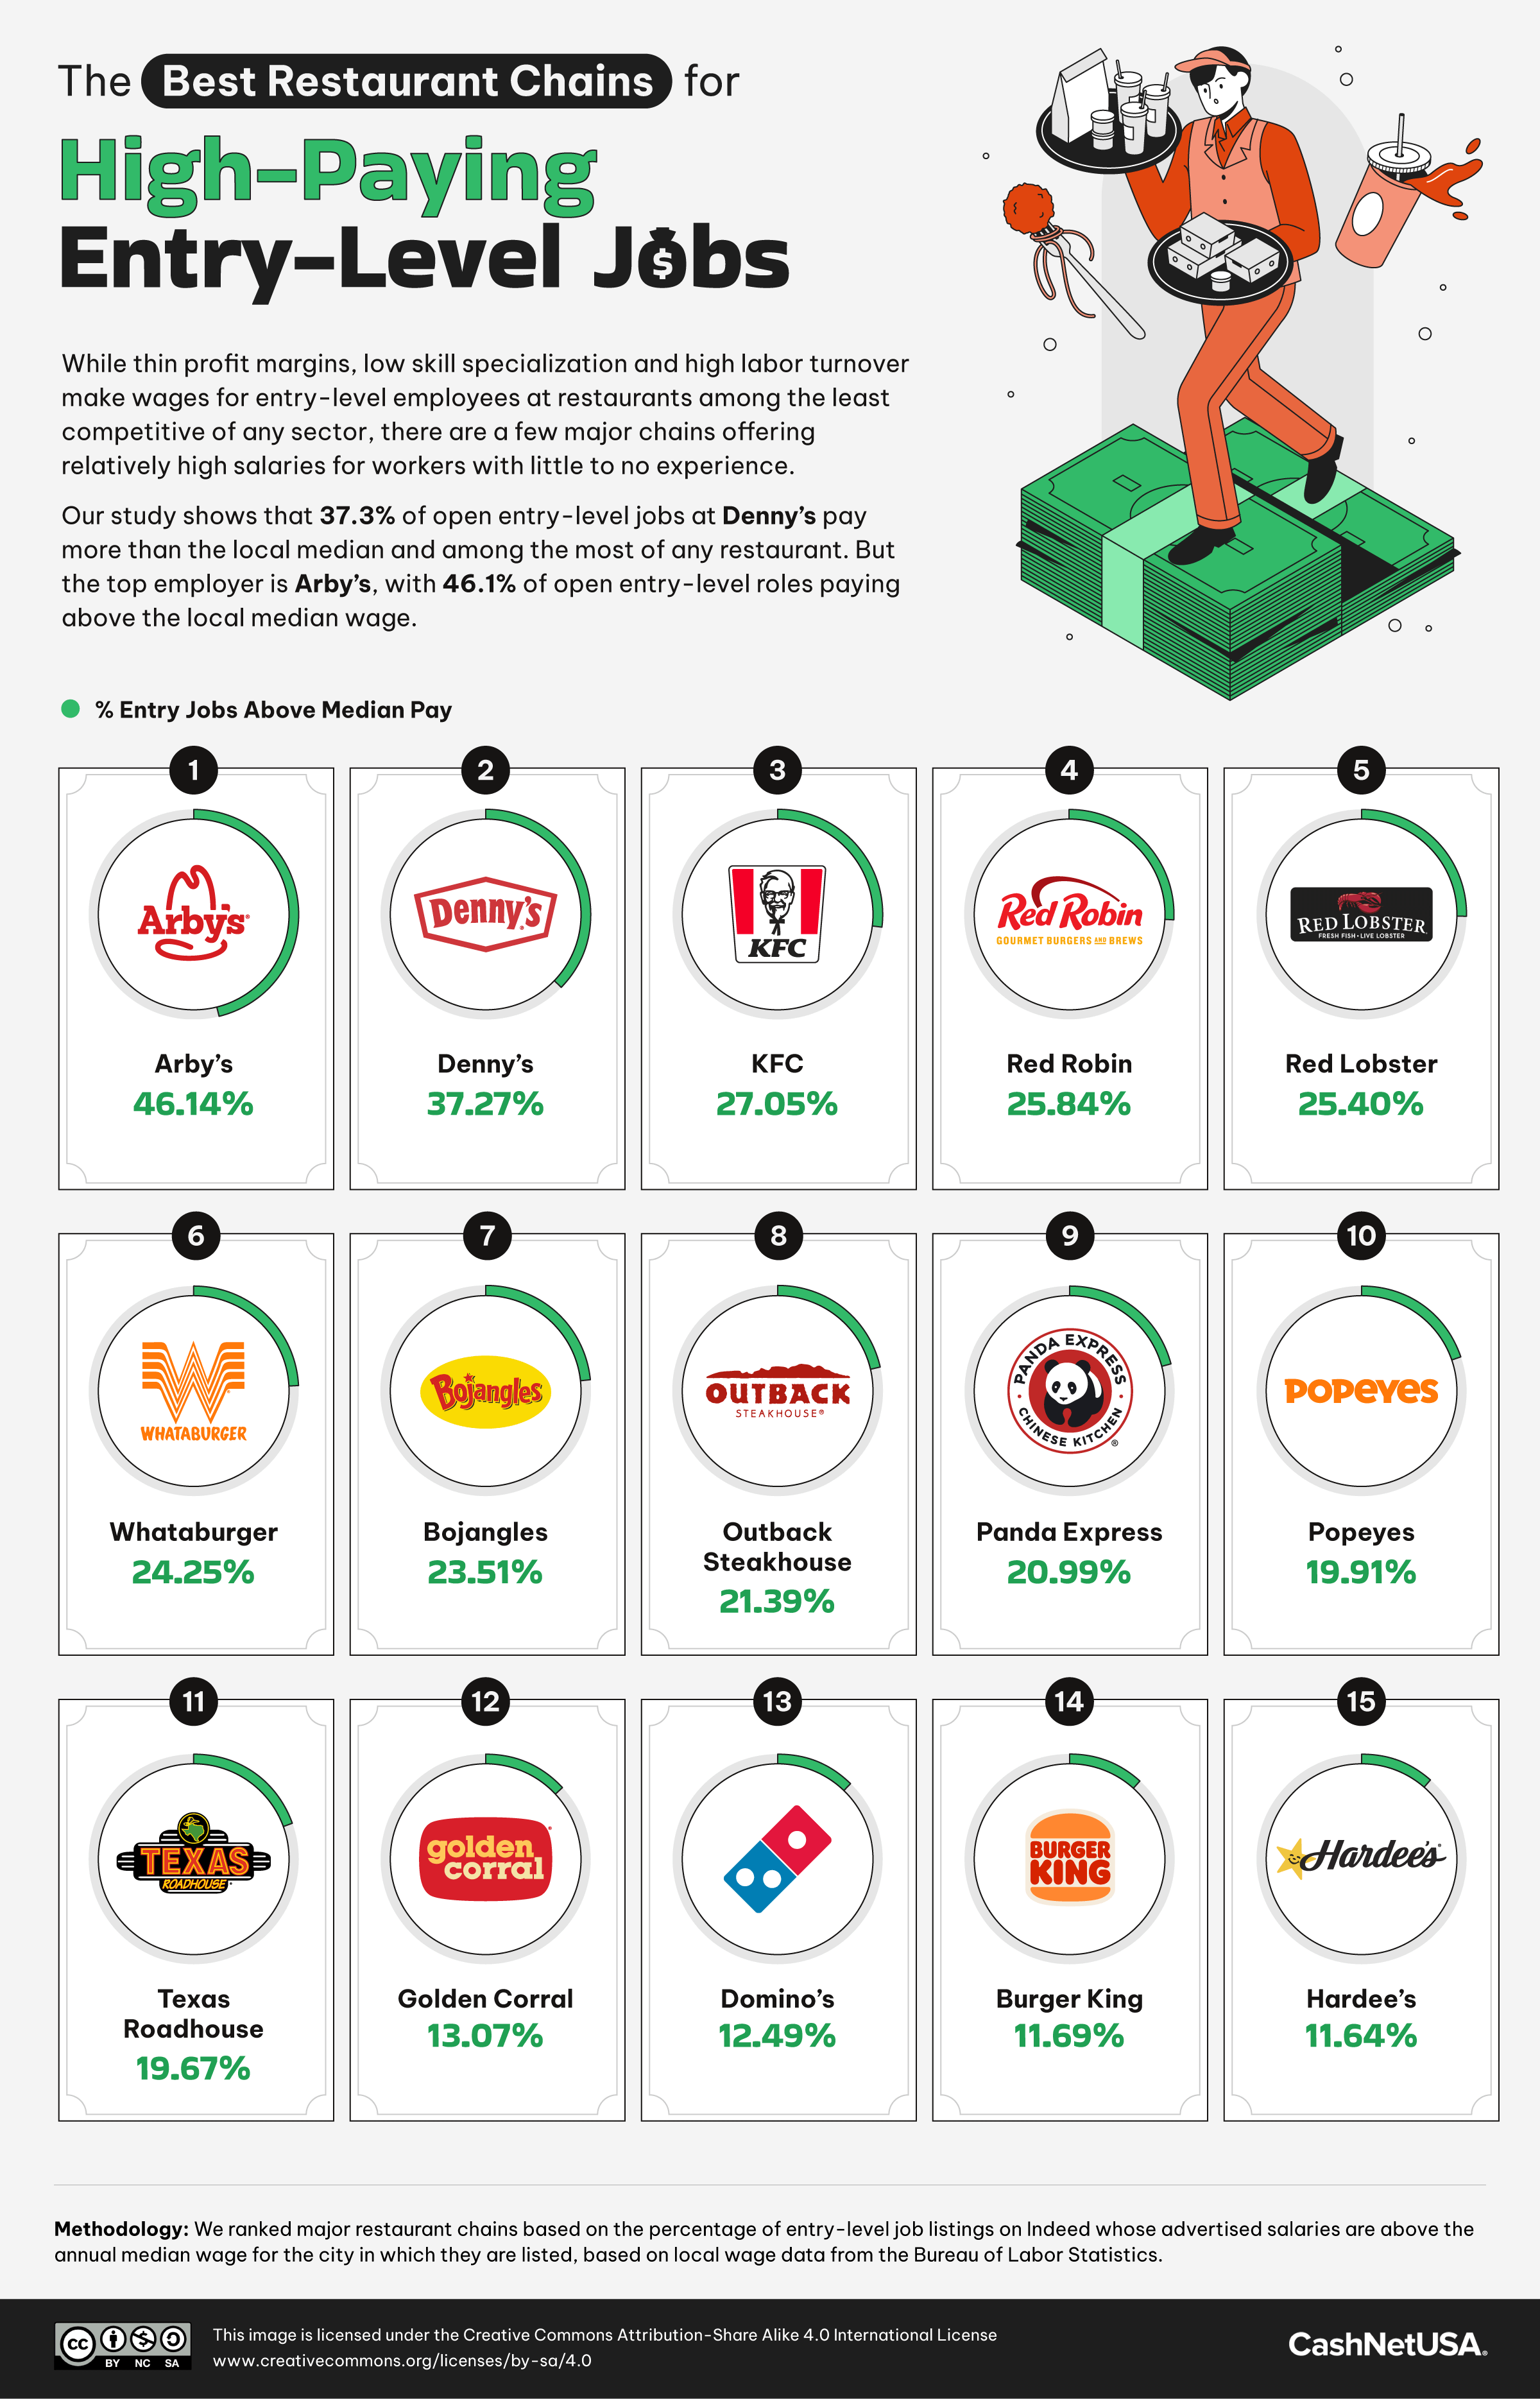 List of the restaurant chains with the highest paying entry level jobs